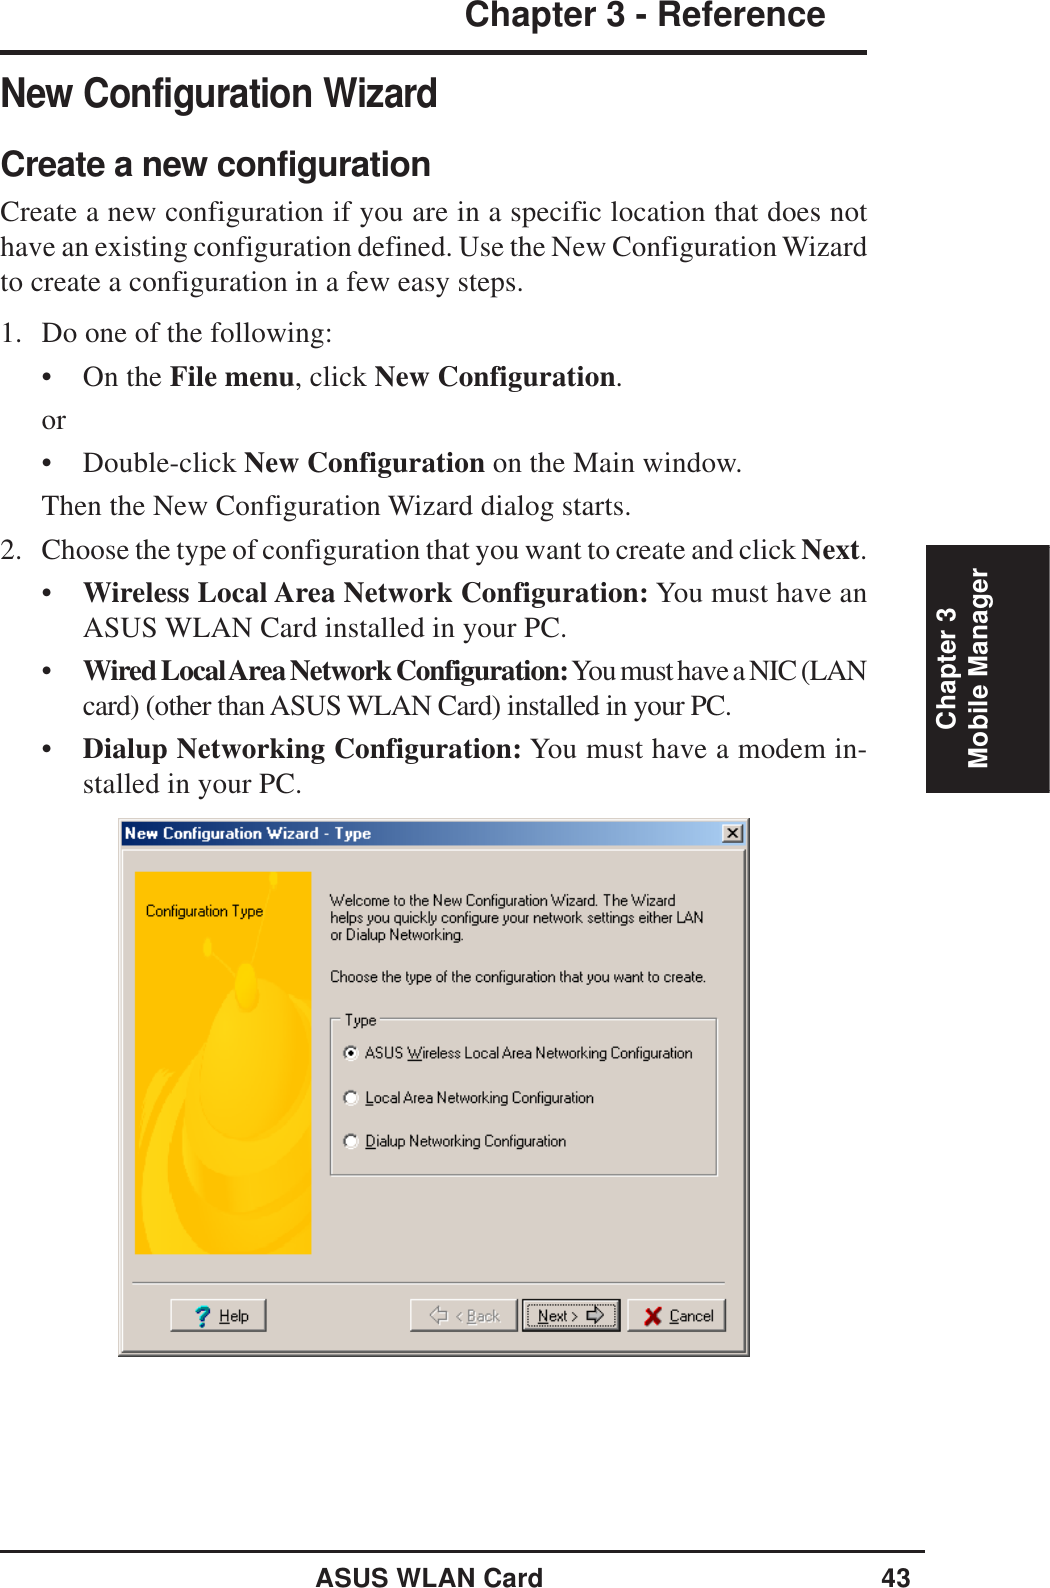 ASUS WLAN Card 43Chapter 3 - ReferenceChapter 3Mobile ManagerNew Configuration WizardCreate a new configurationCreate a new configuration if you are in a specific location that does nothave an existing configuration defined. Use the New Configuration Wizardto create a configuration in a few easy steps.1. Do one of the following:• On the File menu, click New Configuration.or• Double-click New Configuration on the Main window.Then the New Configuration Wizard dialog starts.2. Choose the type of configuration that you want to create and click Next.•Wireless Local Area Network Configuration: You must have anASUS WLAN Card installed in your PC.•Wired Local Area Network Configuration: You must have a NIC (LANcard) (other than ASUS WLAN Card) installed in your PC.•Dialup Networking Configuration: You must have a modem in-stalled in your PC.